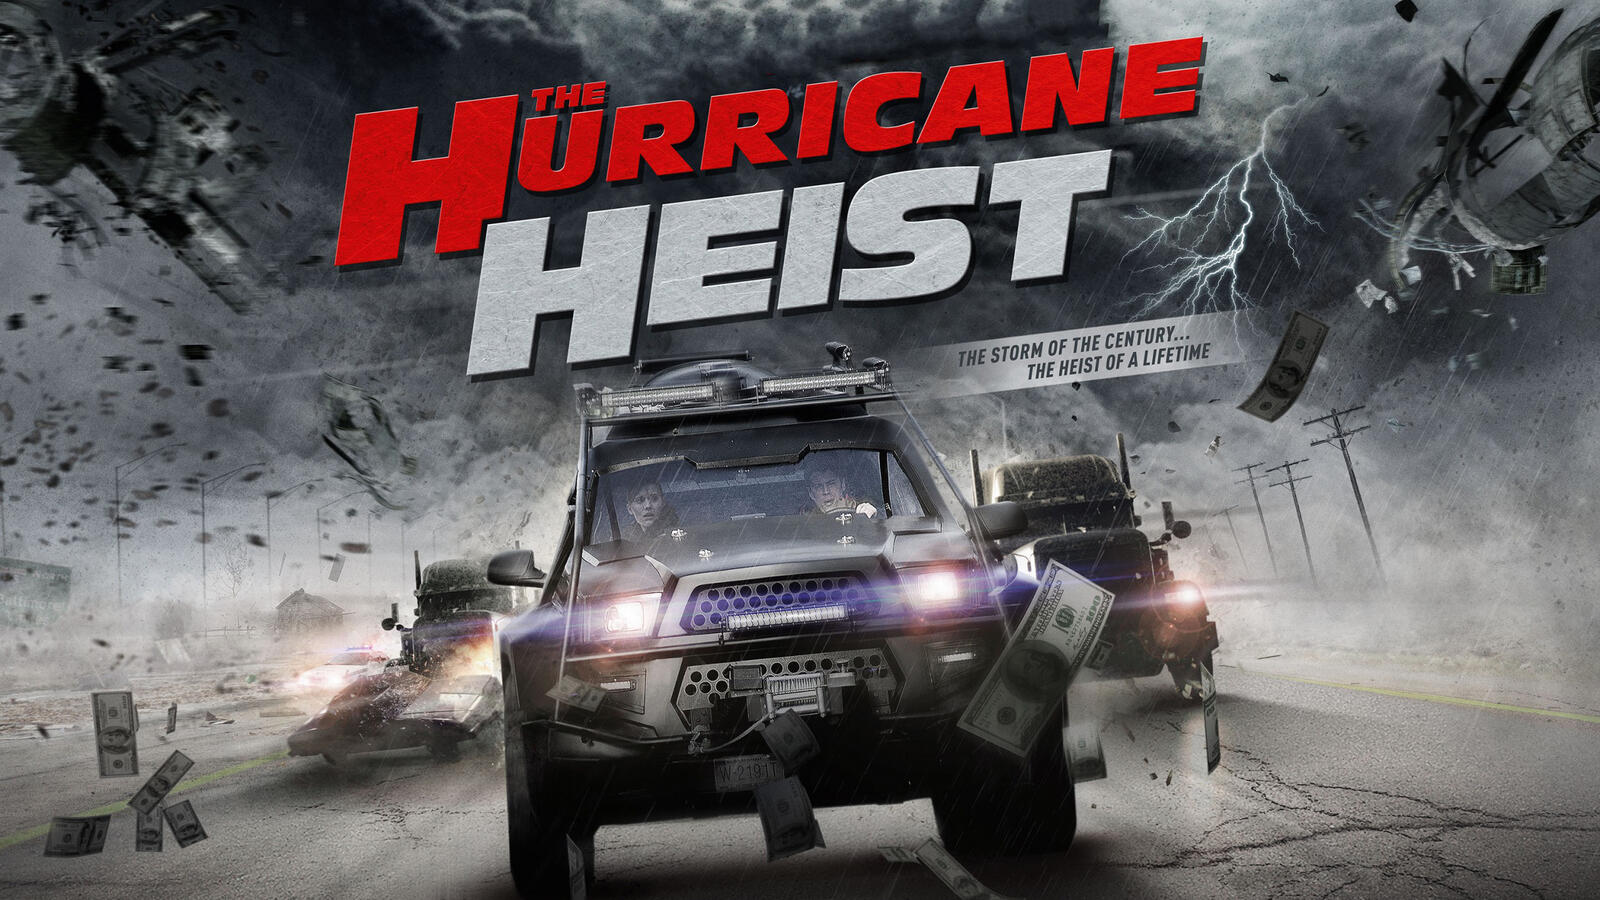 Wallpapers The Hurricane Heist 2018 Movies Movies on the desktop